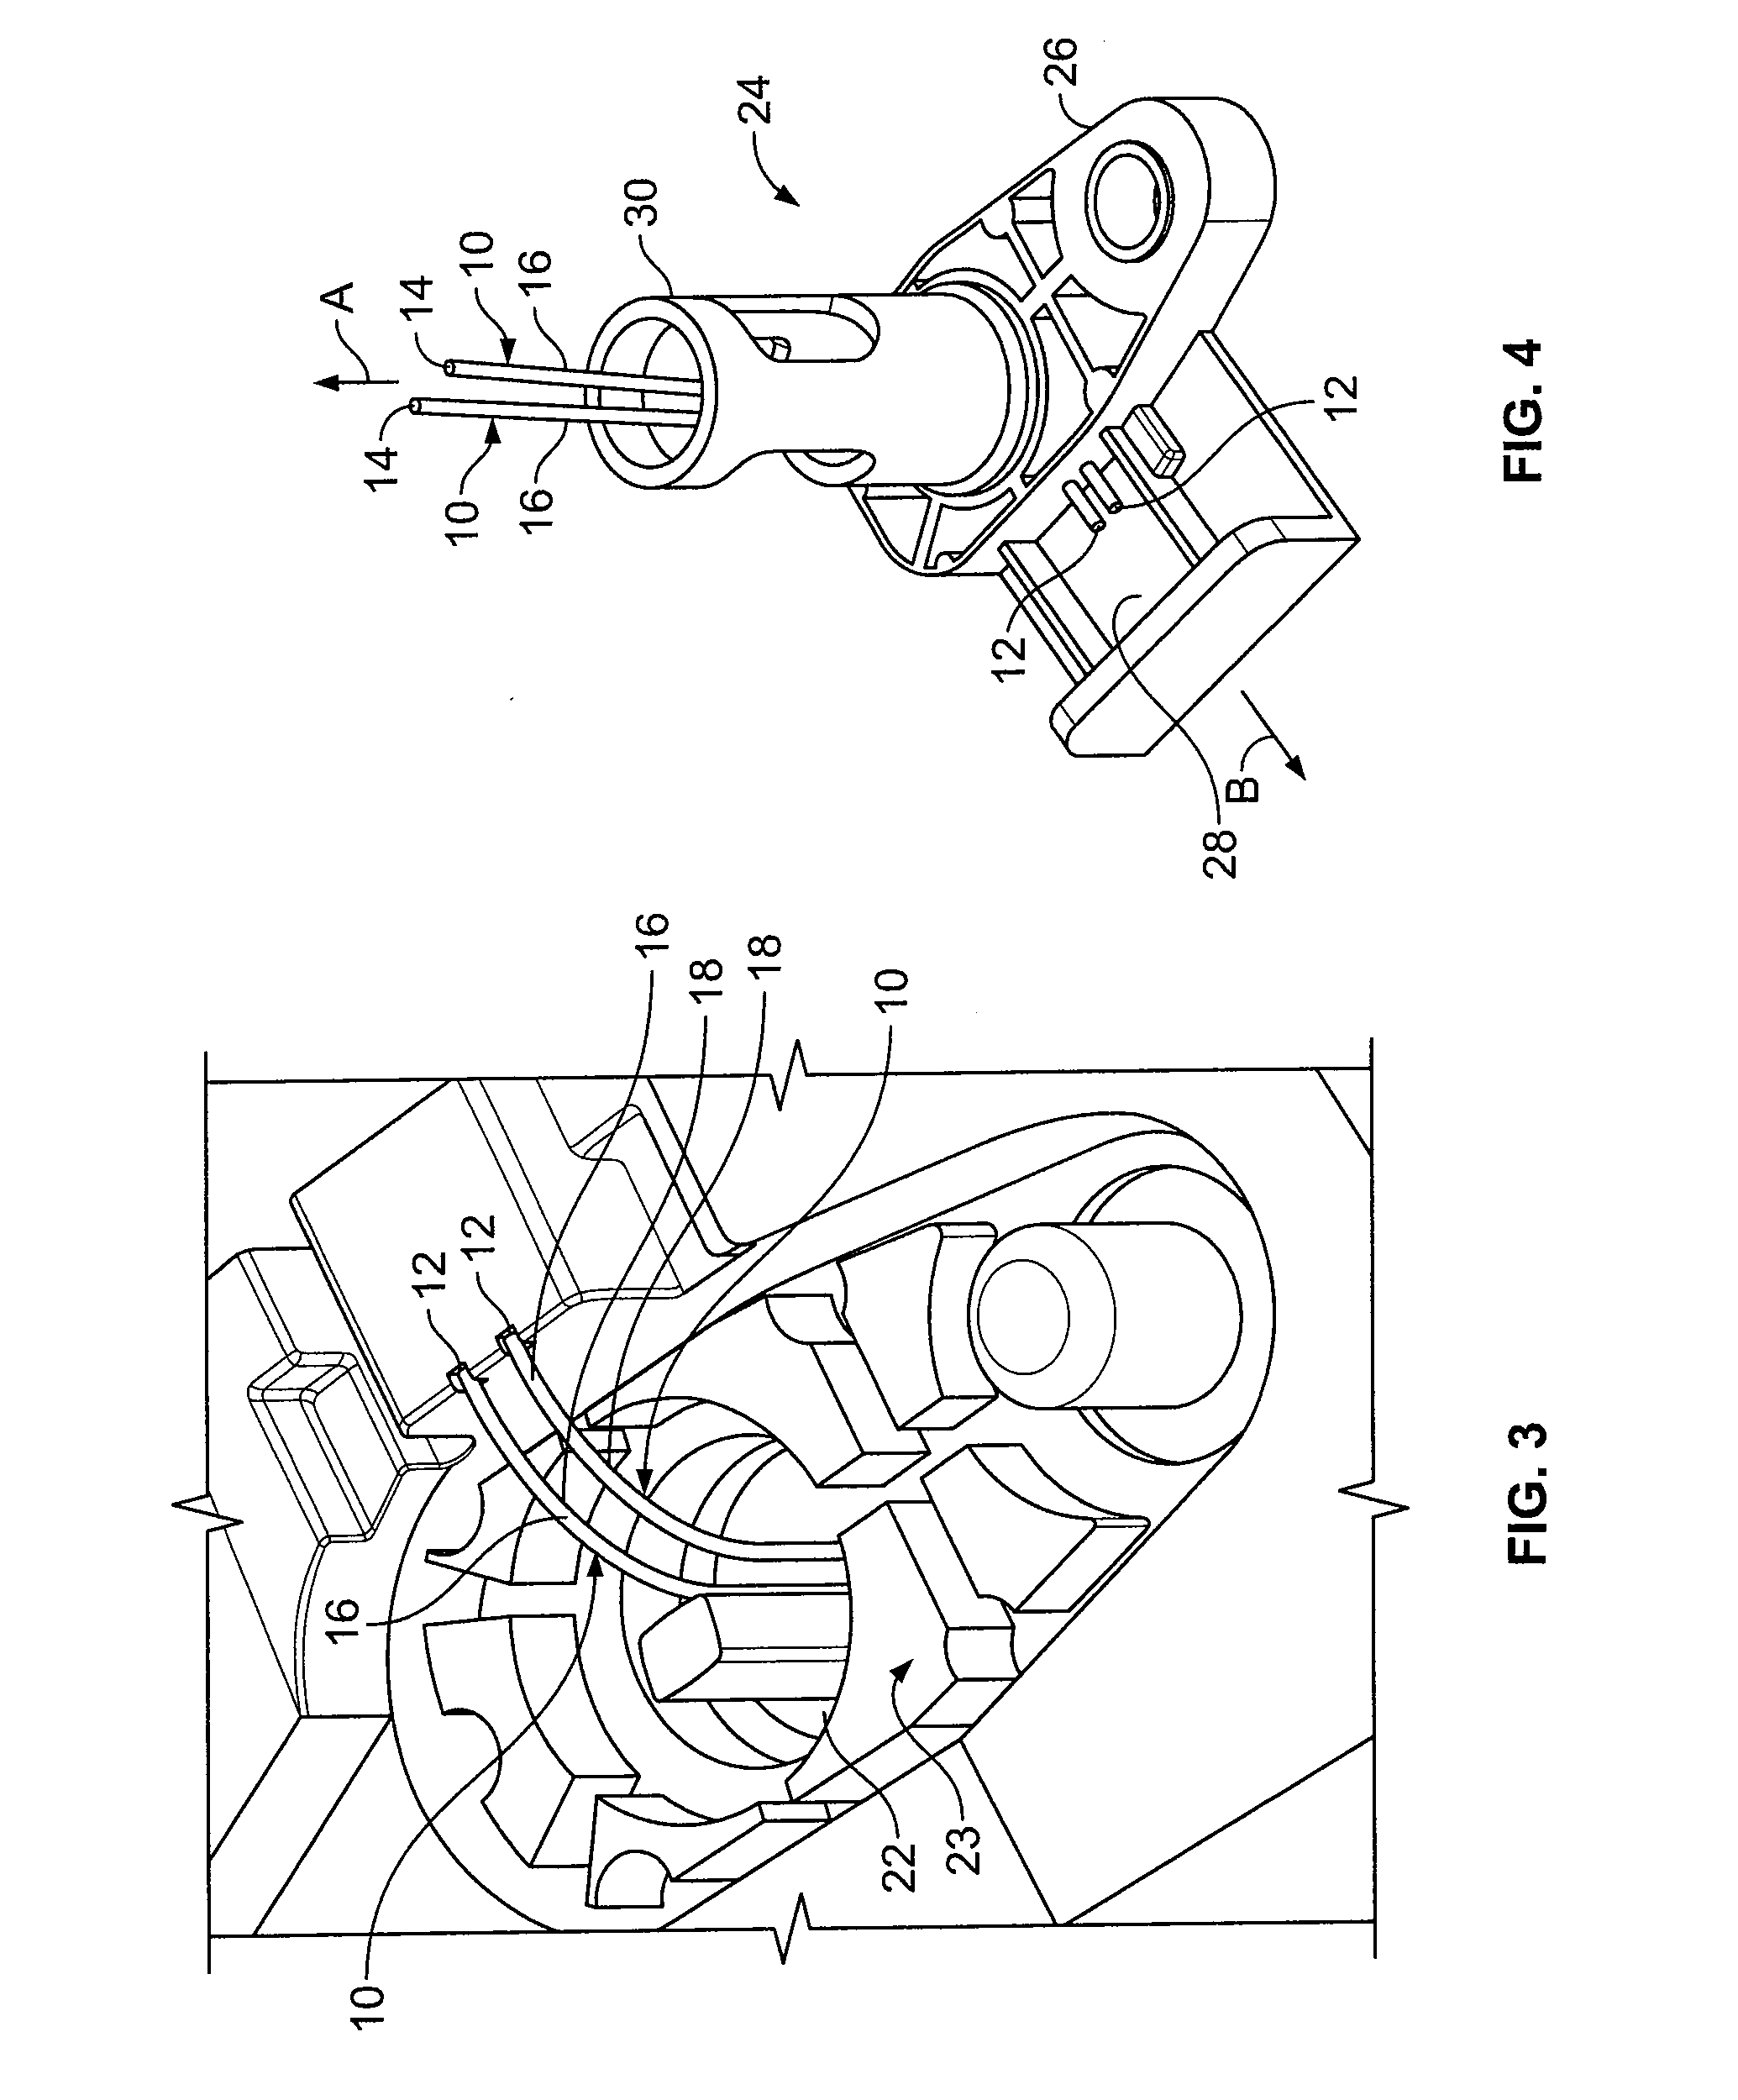 System and method for forming a non-linear channel within a molded component